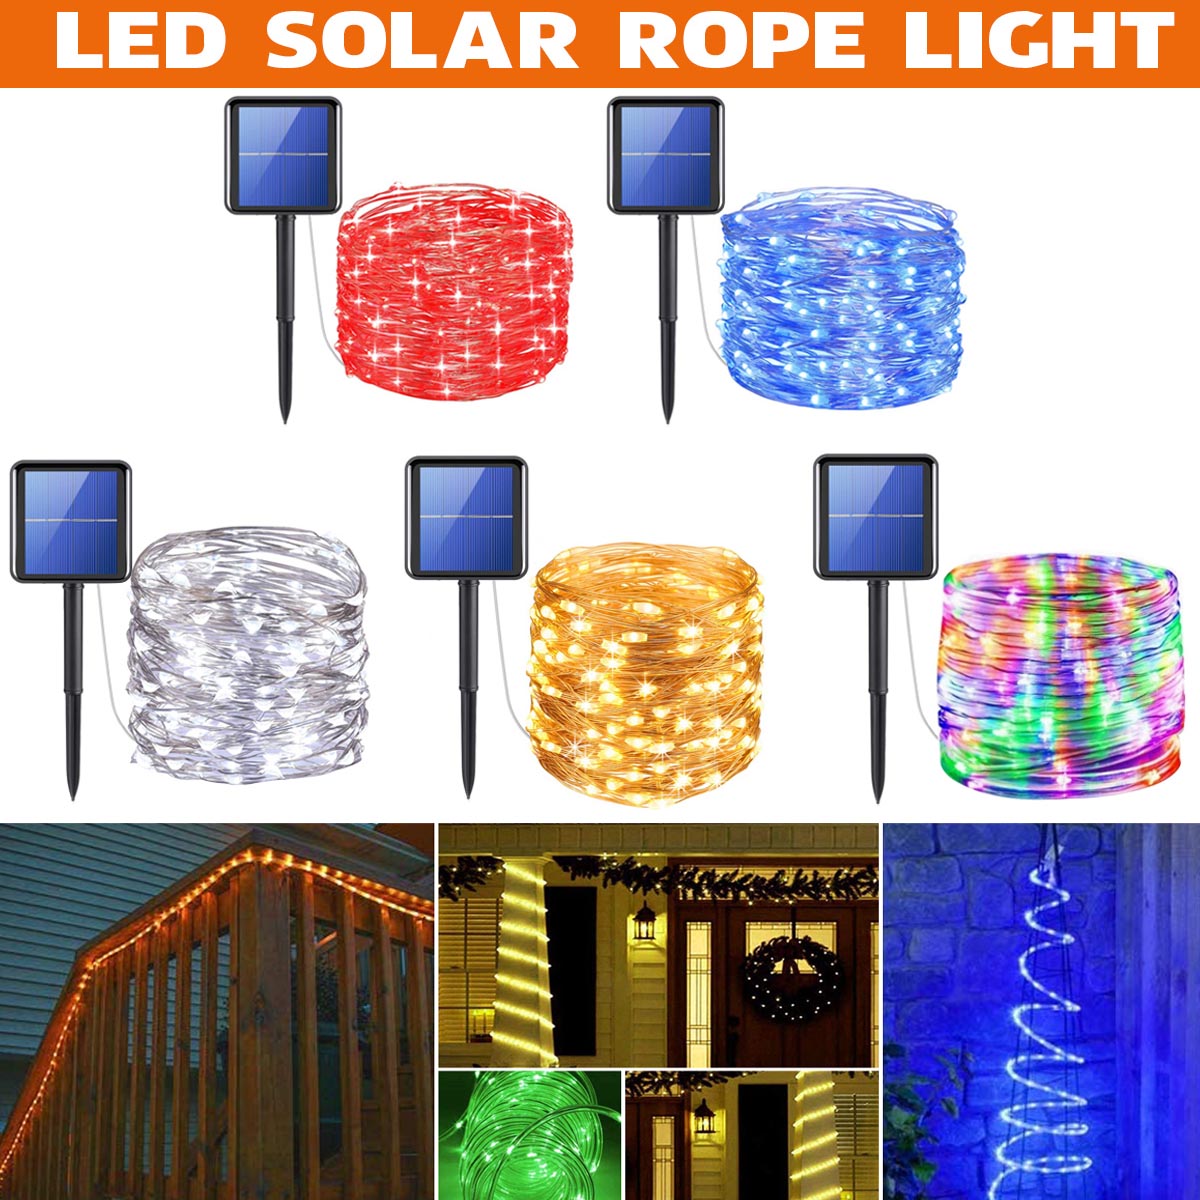 12m-50LED-8-Modes-Solar-String-Lights-Fairy-Strip-Yard-Party-Wedding-Decor-Colorful-Waterproof-1809547-1